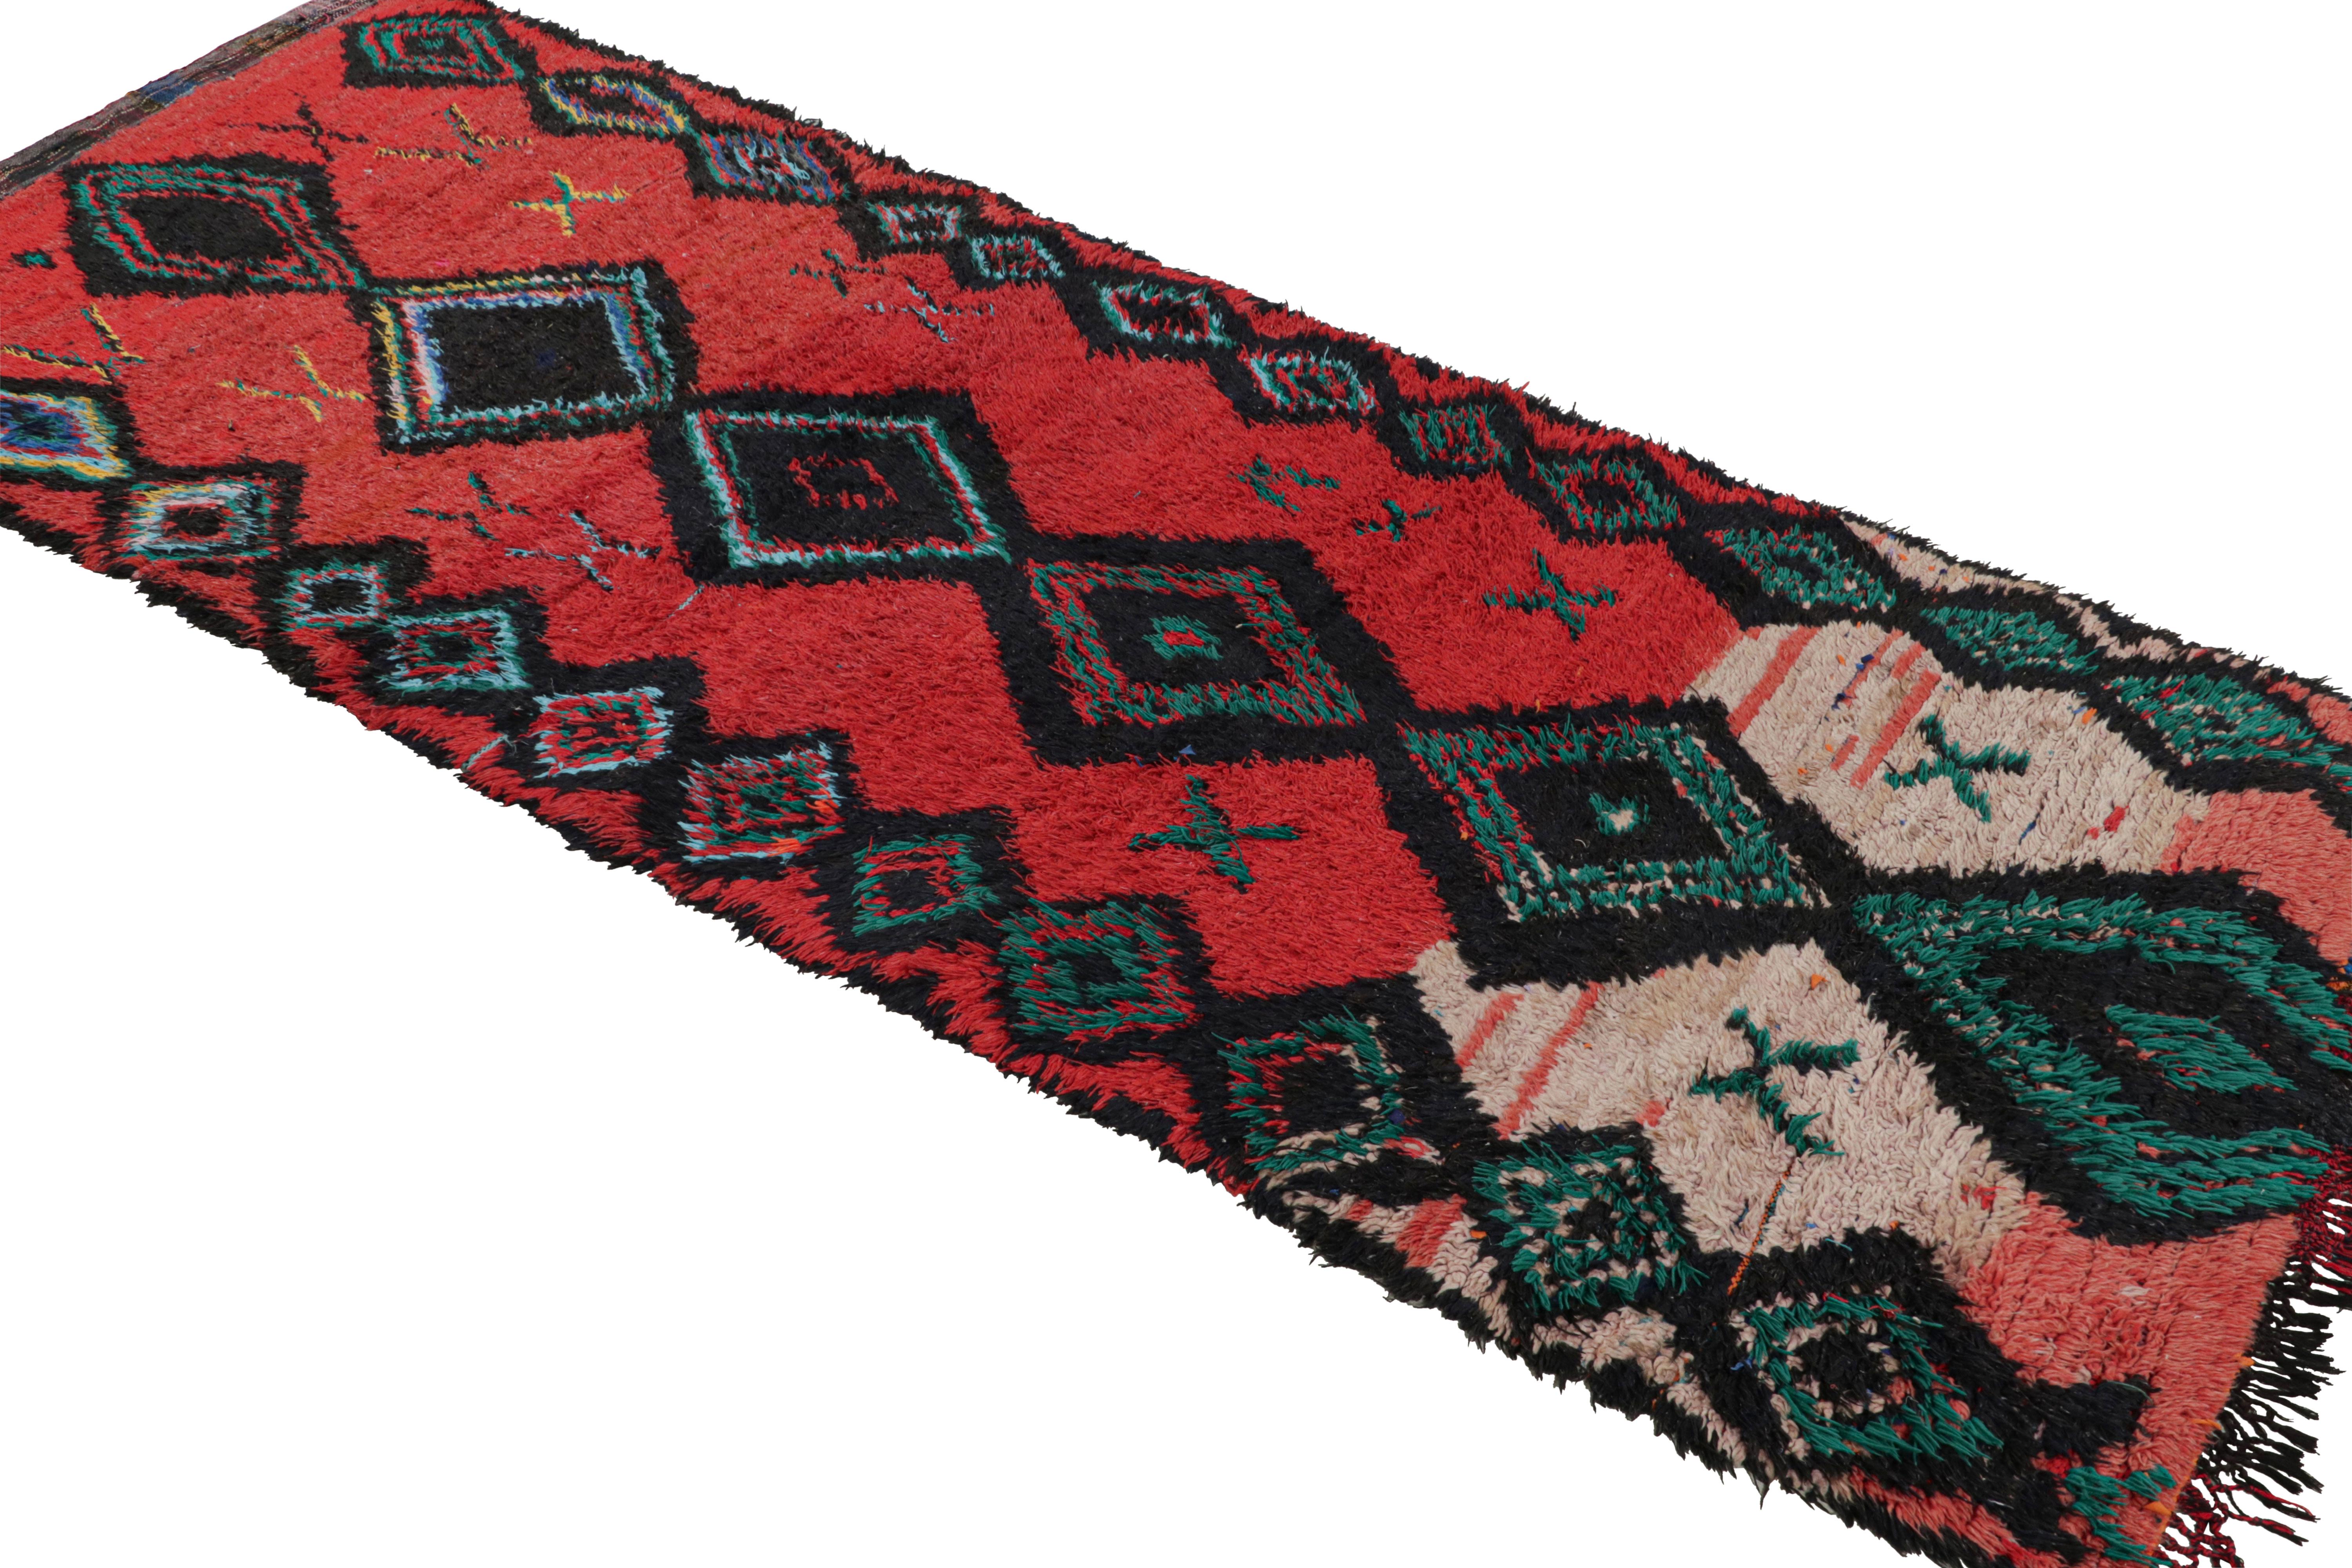 Originating from Morocco in the 1950s, this vintage midcentury Moroccan wool rug symbolizes strength, protection, and femininity through the combination of bold red colourways and diamond-shaped lozenges. Hand knotted in high quality wool, the